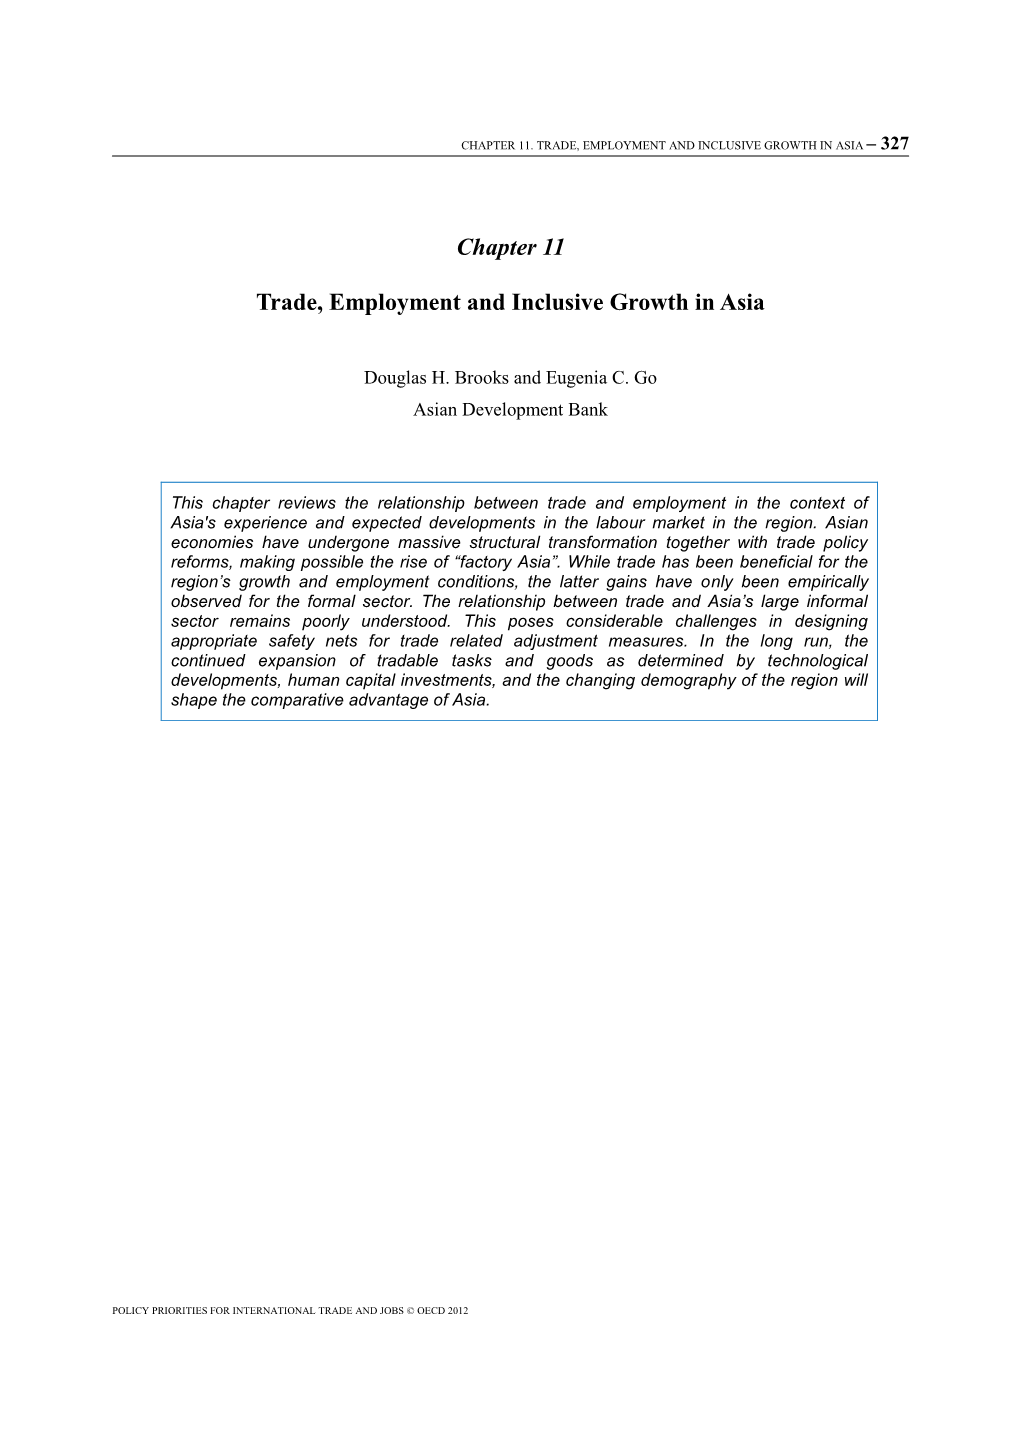 Chapter 11 Trade, Employment and Inclusive Growth in Asia